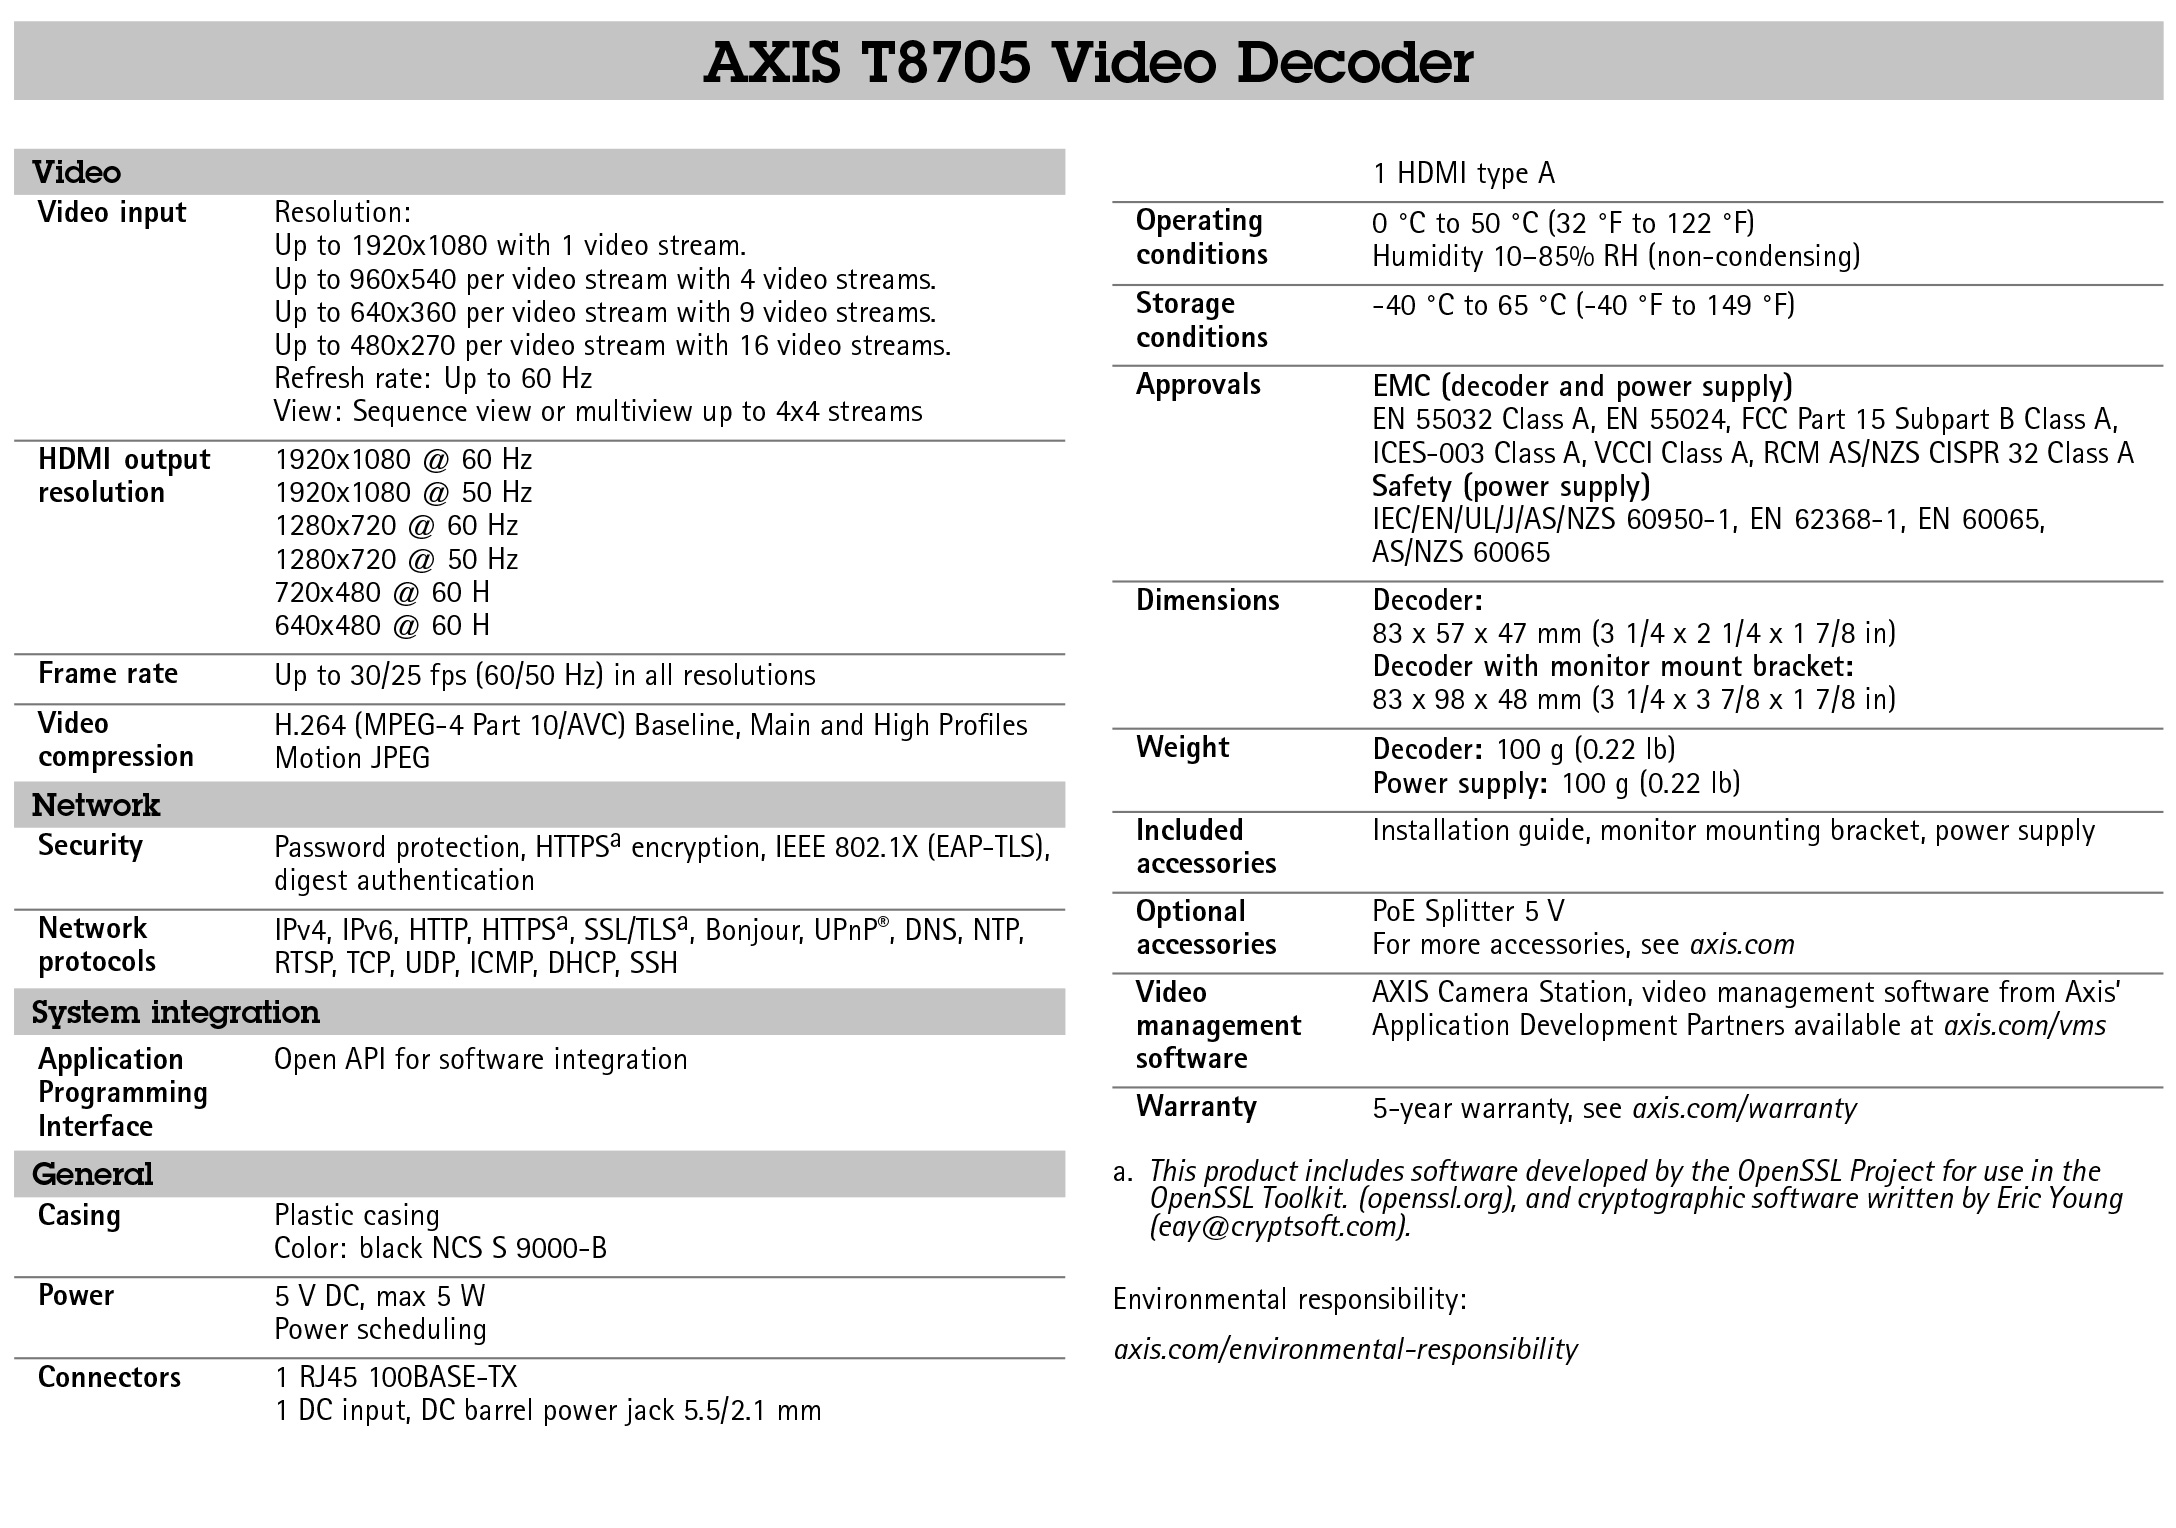 AXIS T8705 Video Decoder